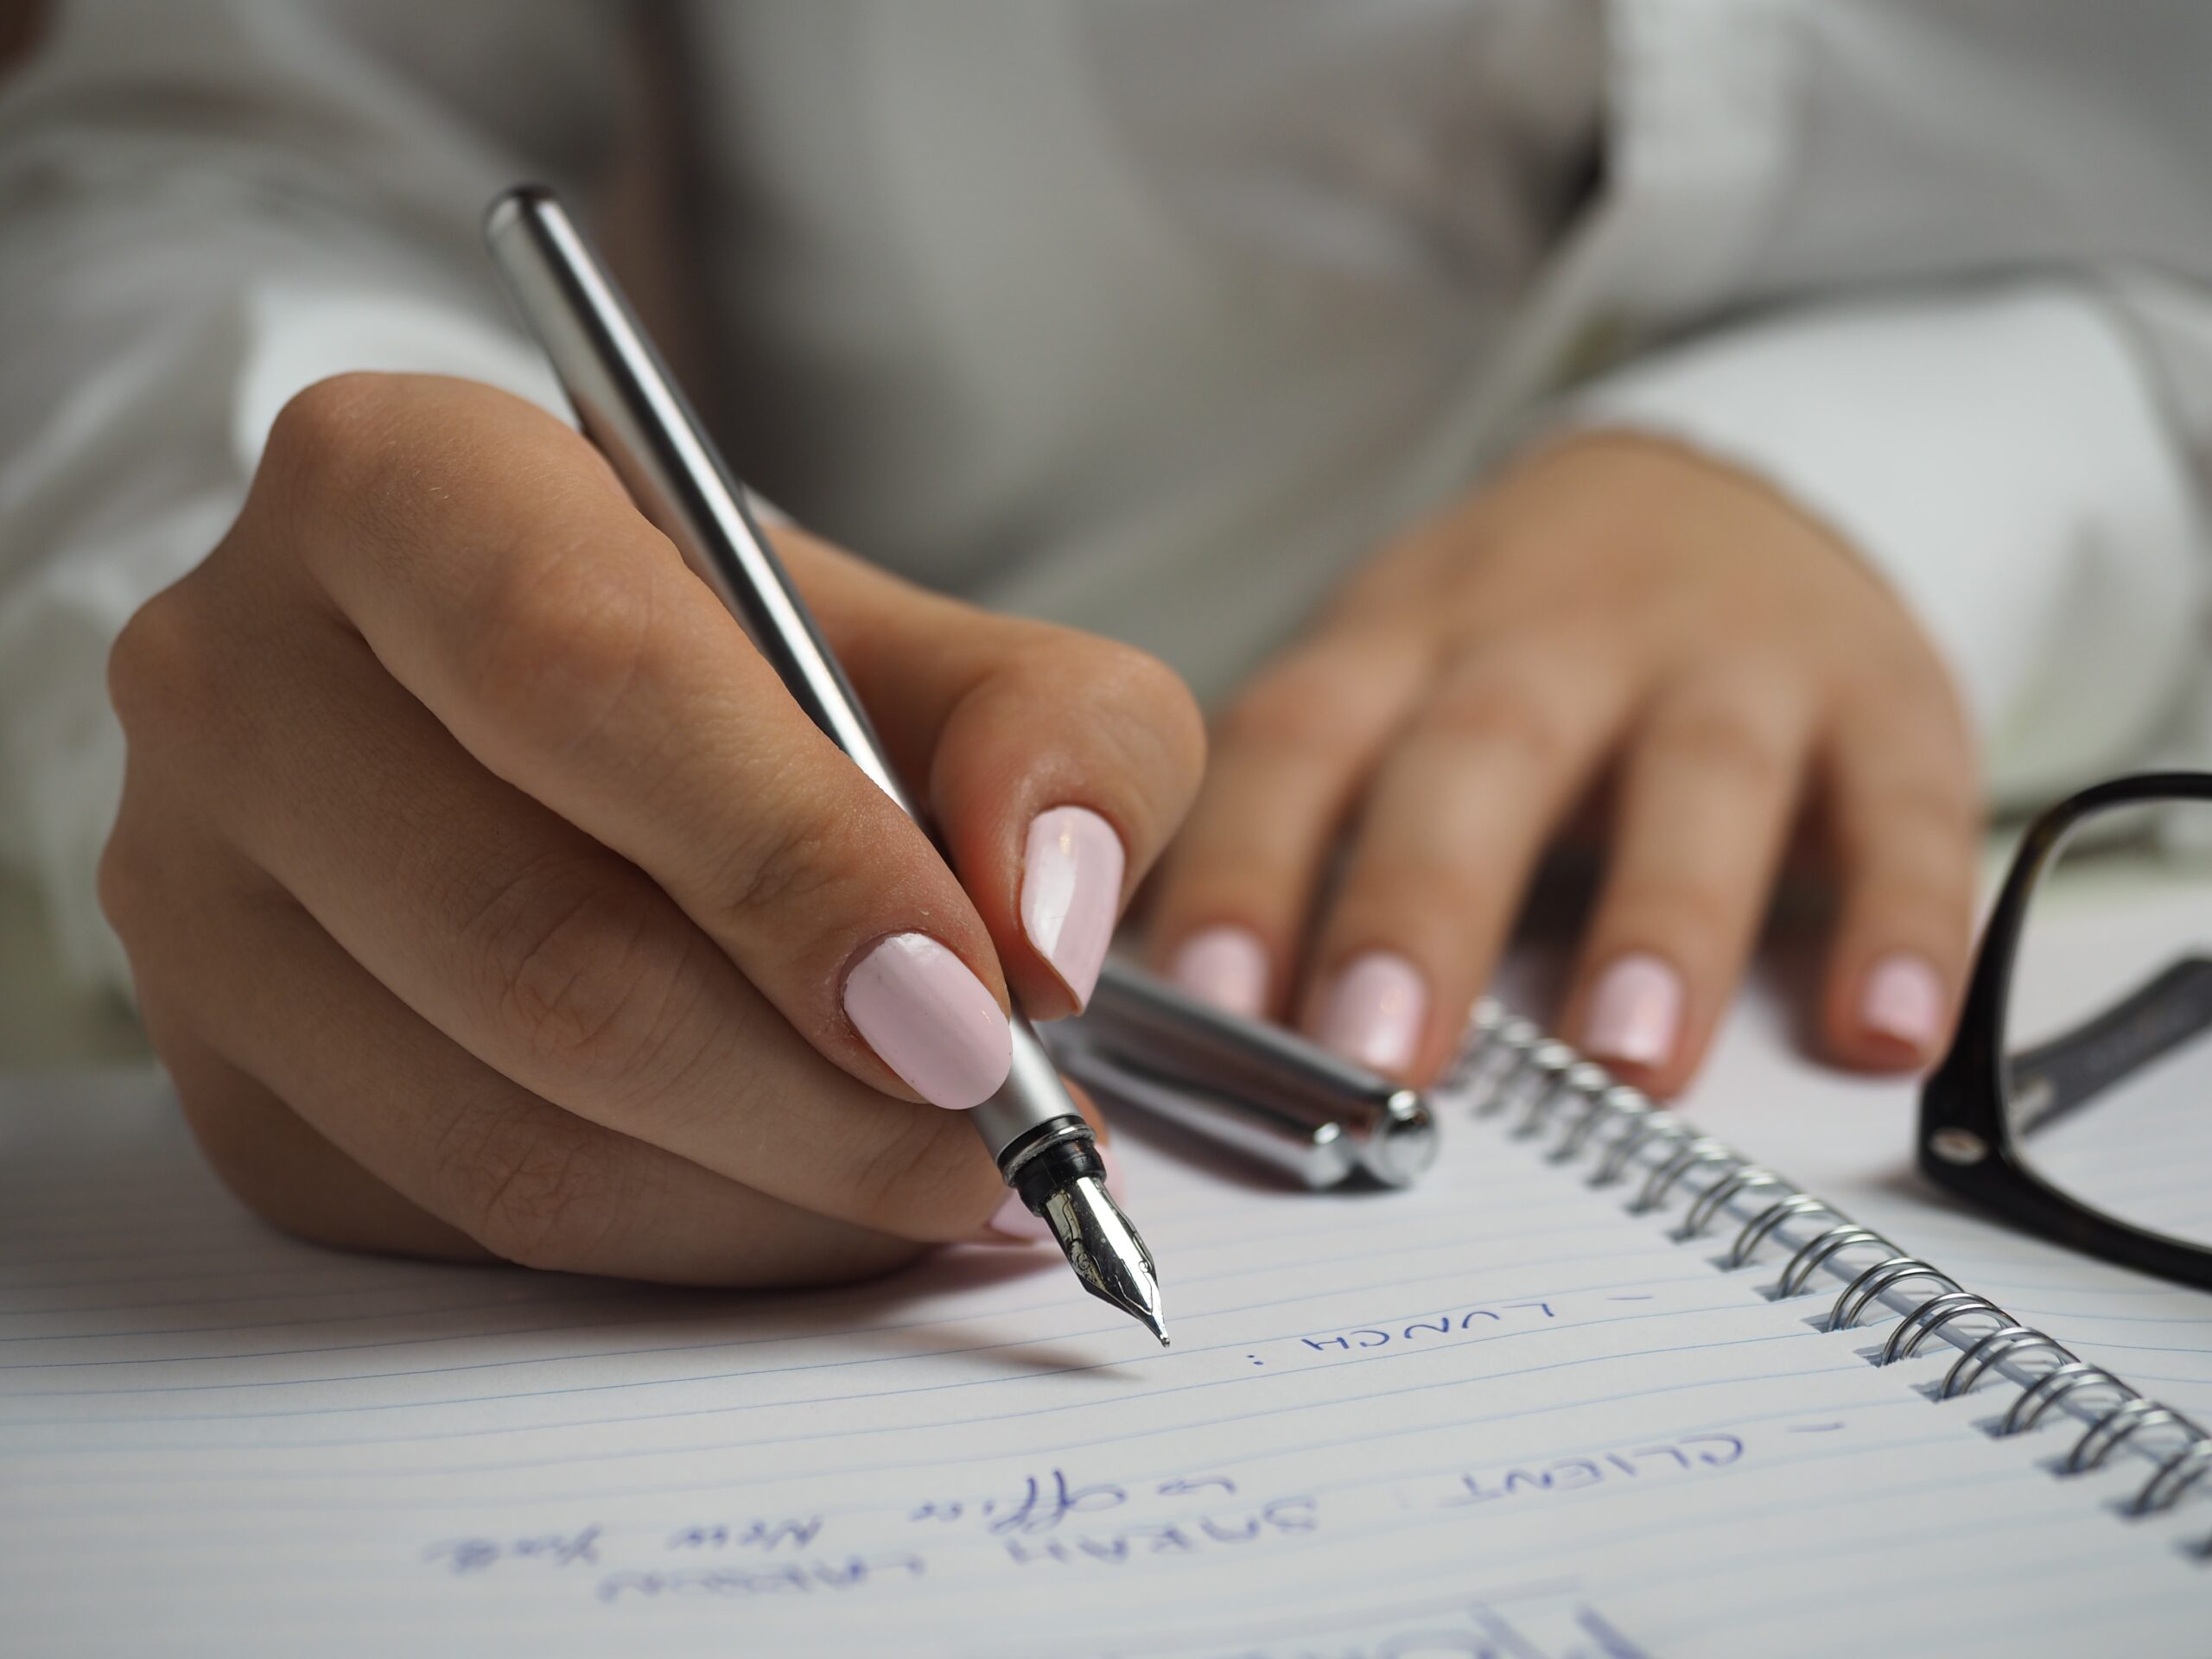 woman-in-white-long-sleeved-shirt-holding-a-pen-writing-on-a-paper